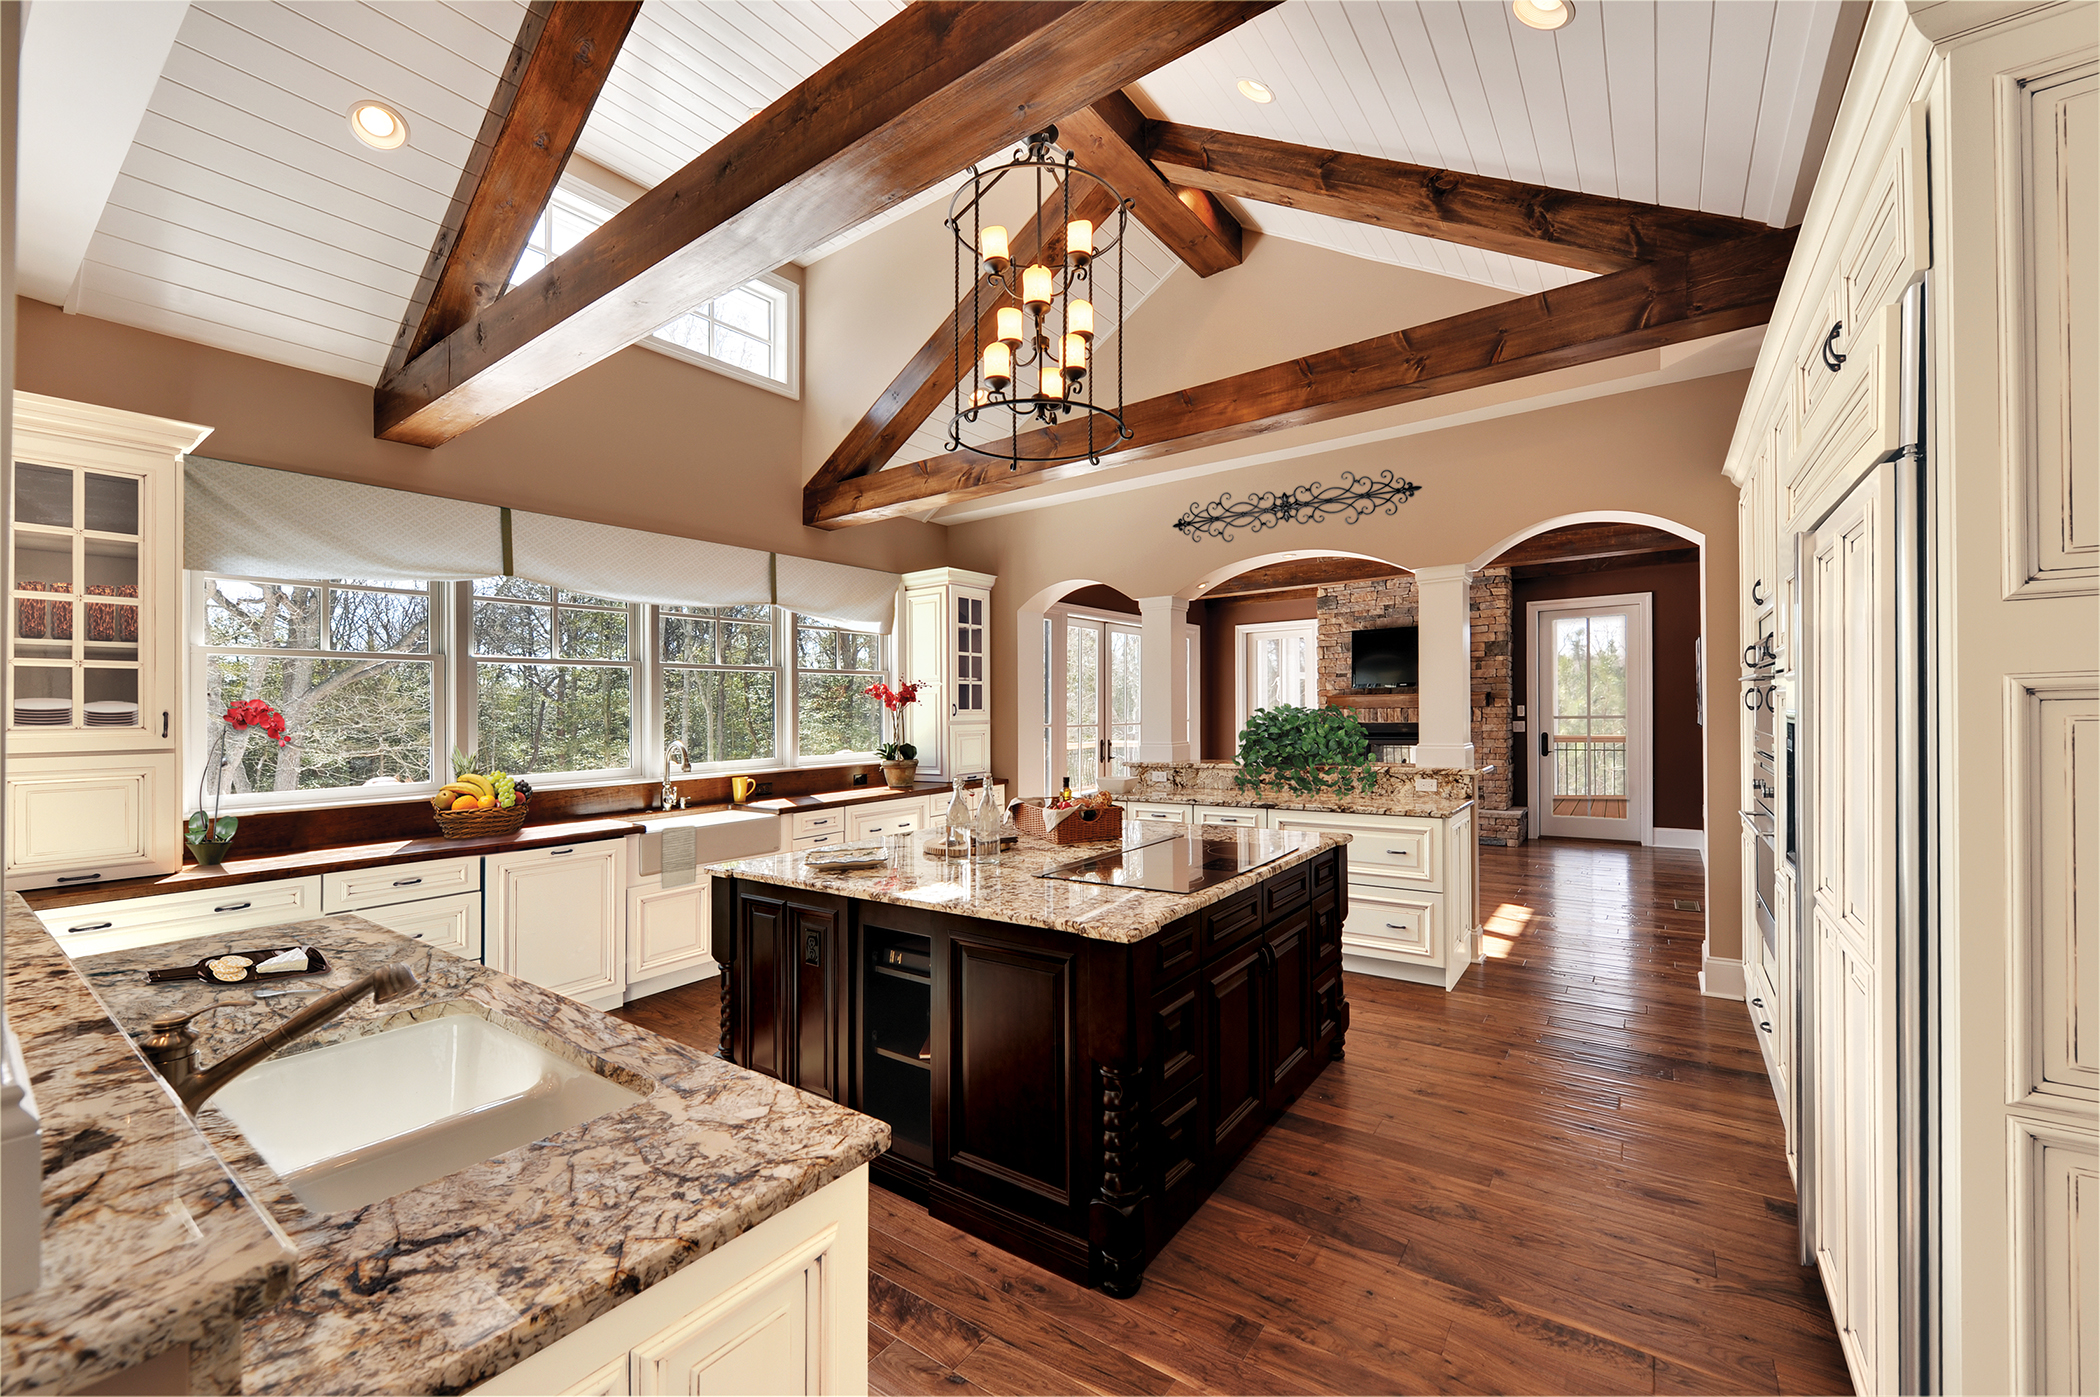 The architectural and top to bottom details are crucial to the design of this kitchen. From the beams and archways to the mullion cabinet doors and island legs, this kitchen portrays every aspect of traditional.